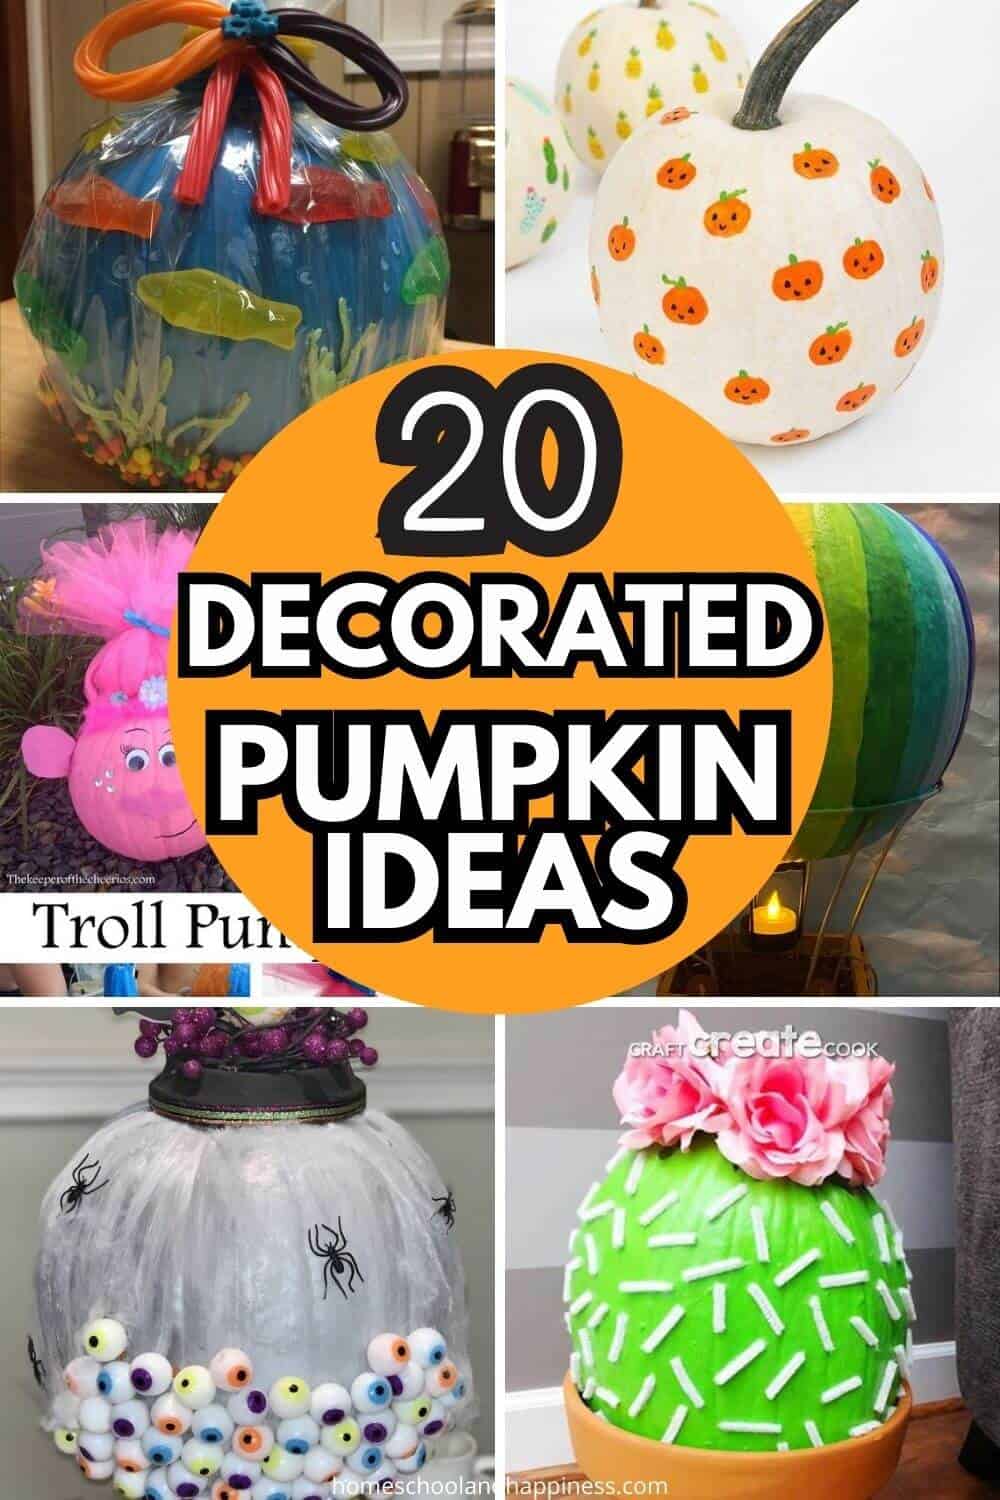 20 Ideas to Decorate Pumpkins That Are Creative and Fun